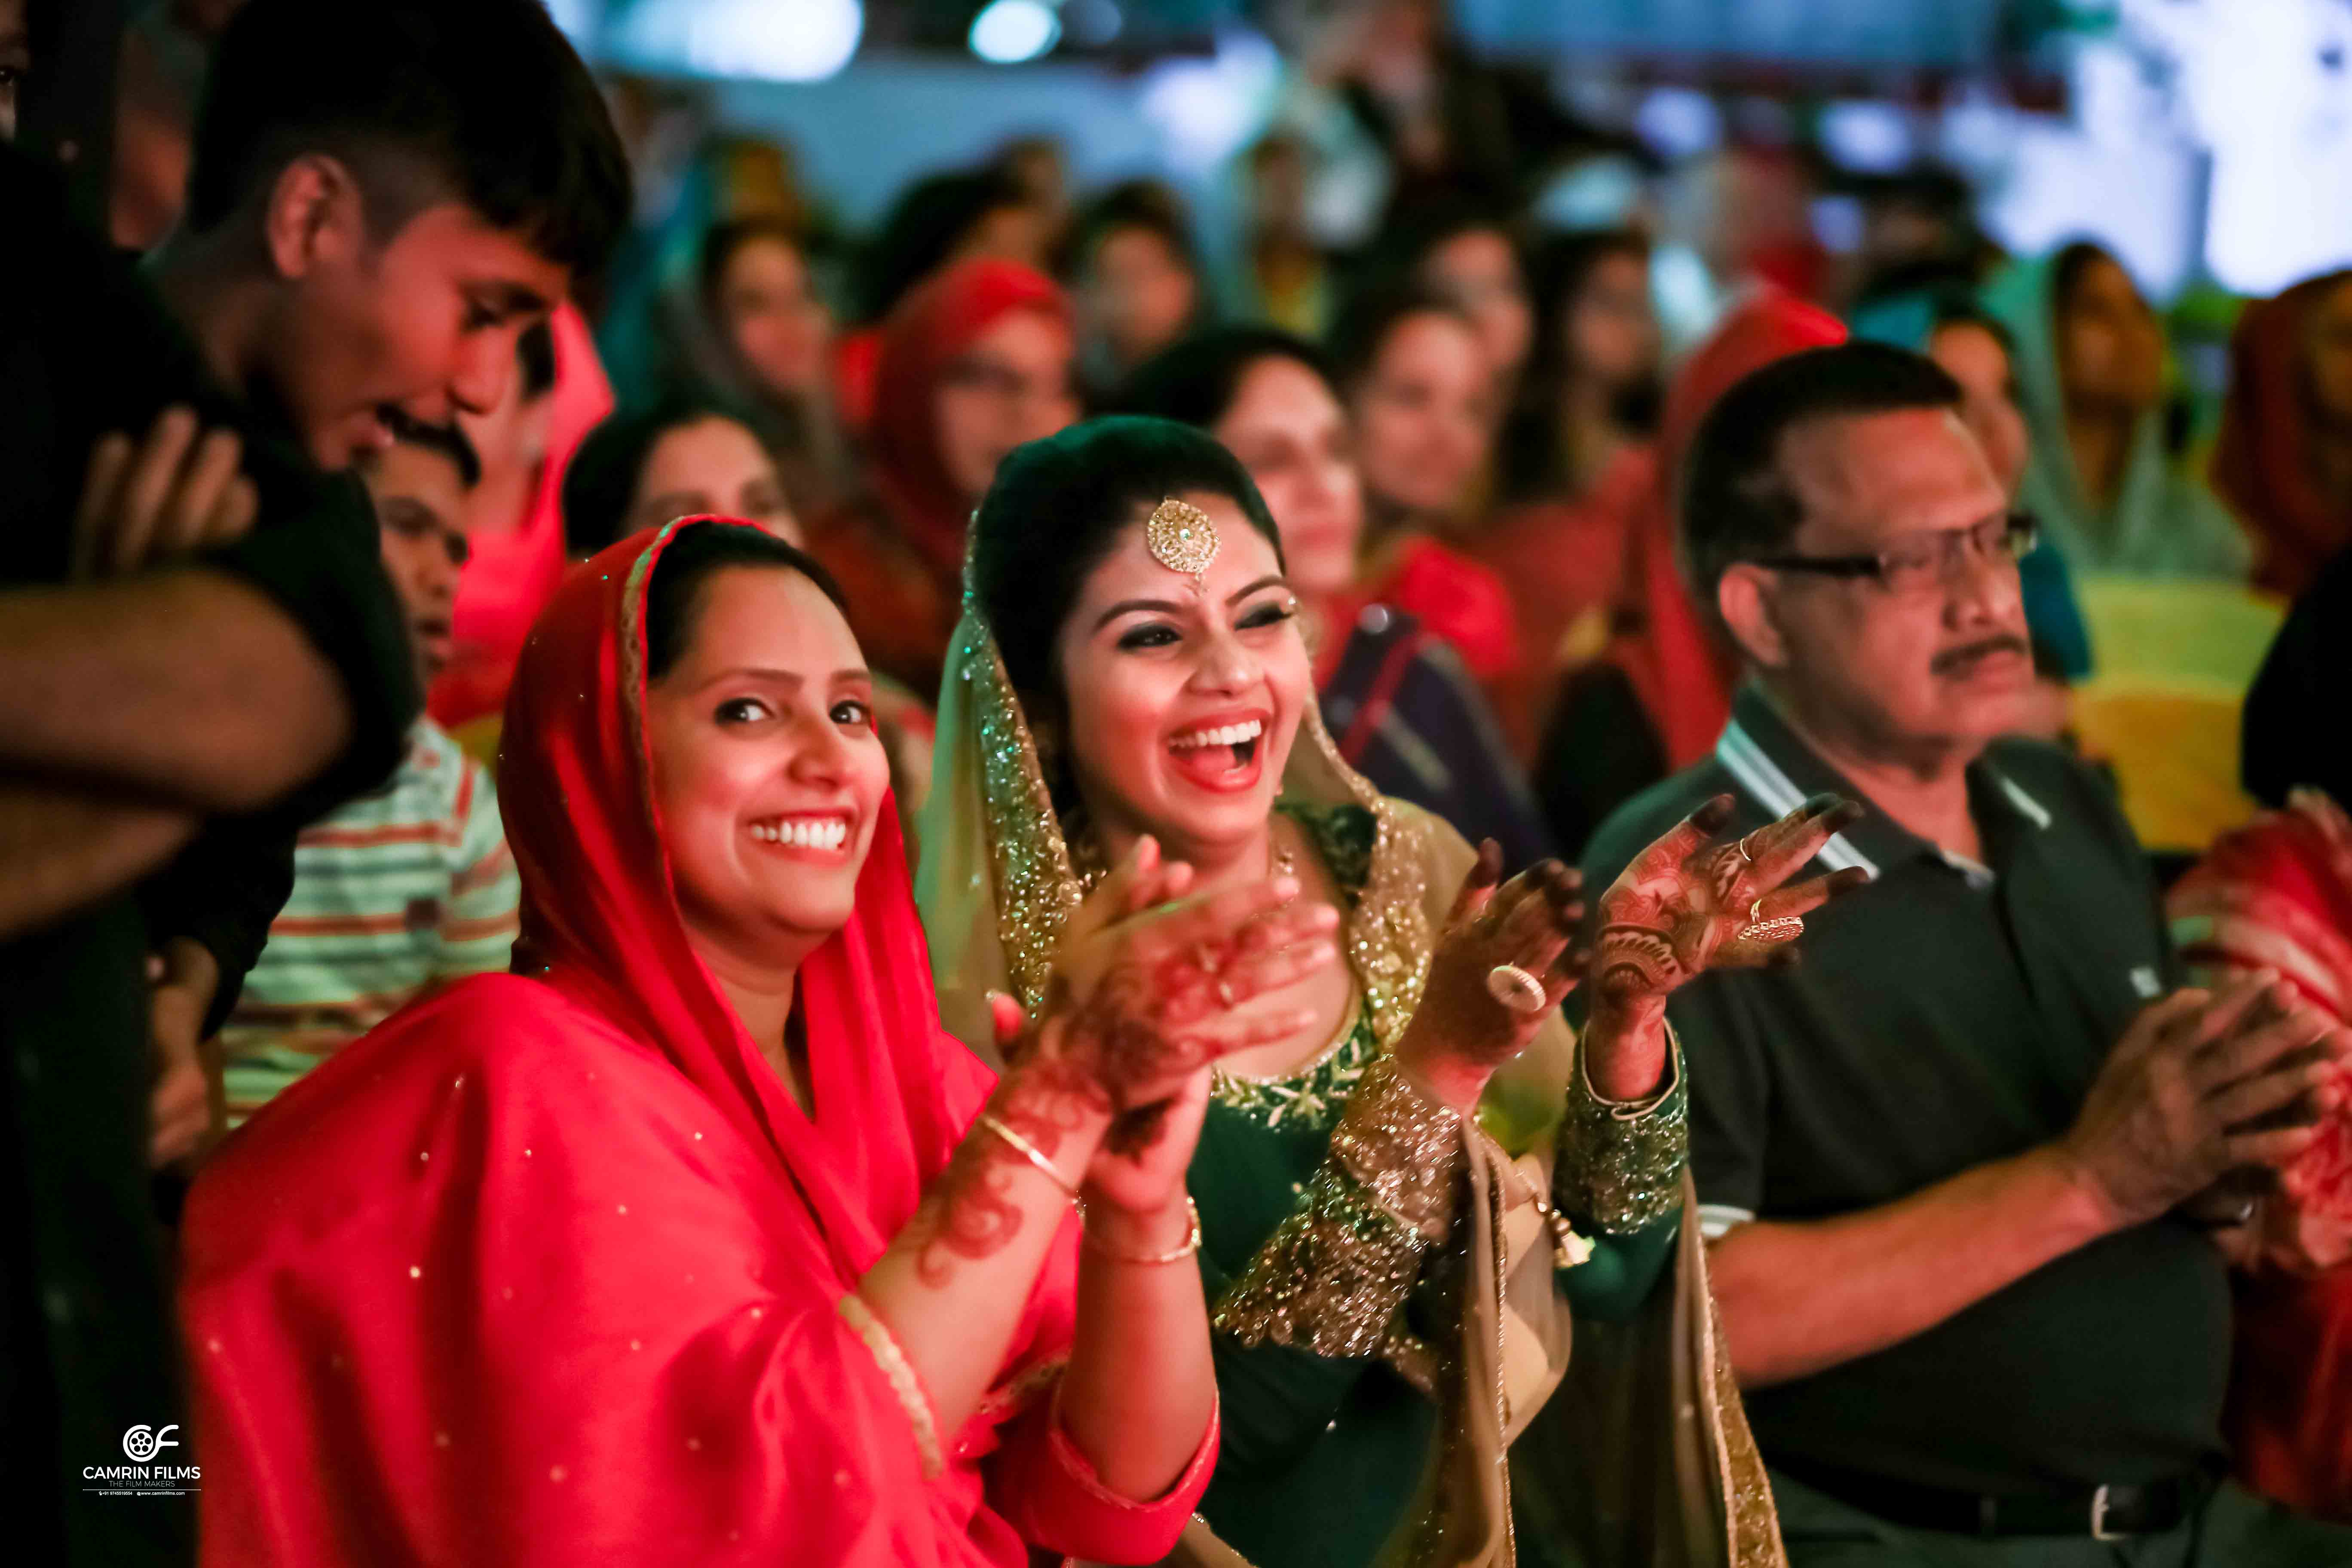 Aboobacker Rizma Mehndi for the Mehndi Wedding at of Muslim events by professional photographers